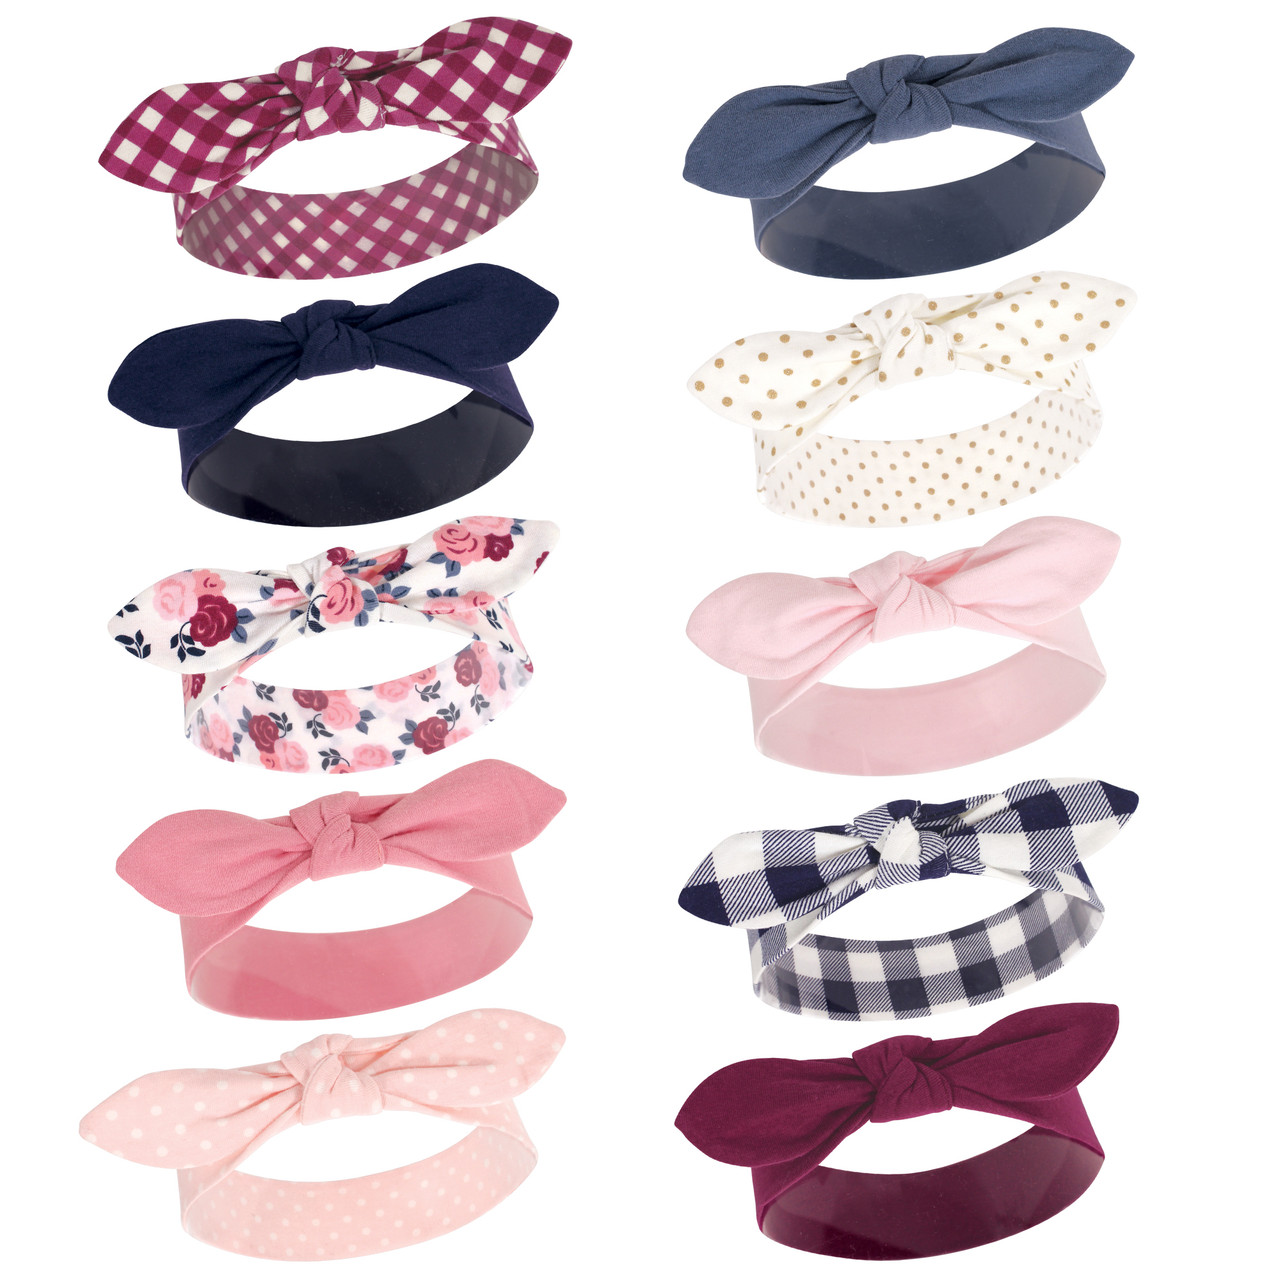 Hudson Baby Cotton Headbands, Pink and 